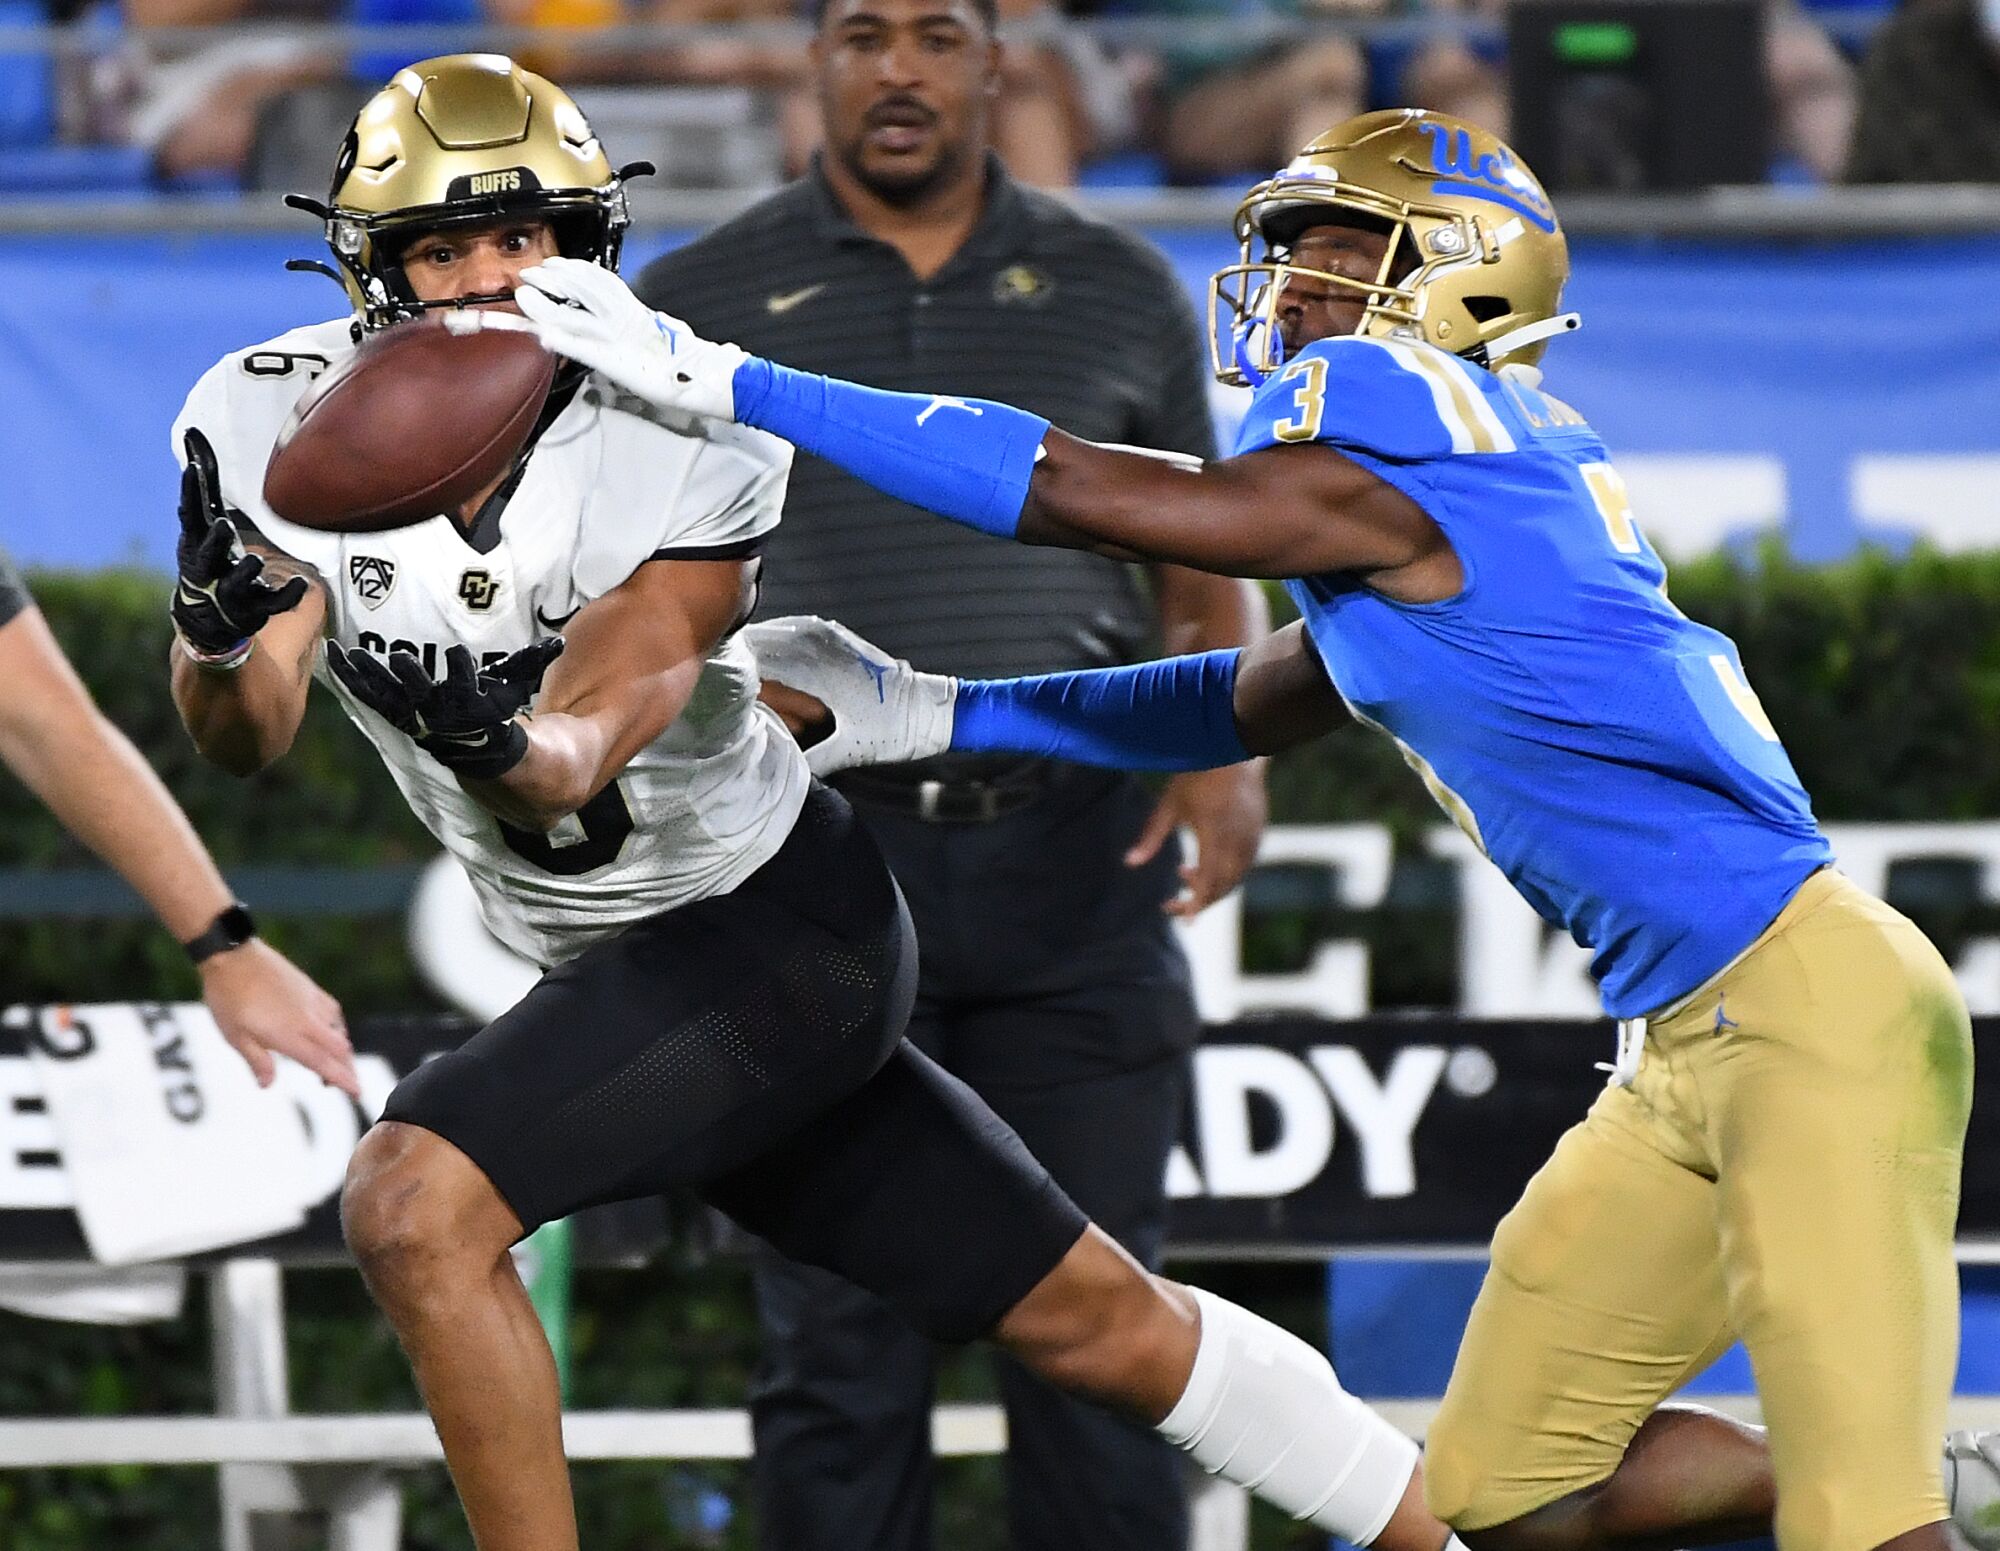  Colorado receiver La'Vontae Shenault hauls in a long pass in front of UCLA defensive back Cameron Johnson.